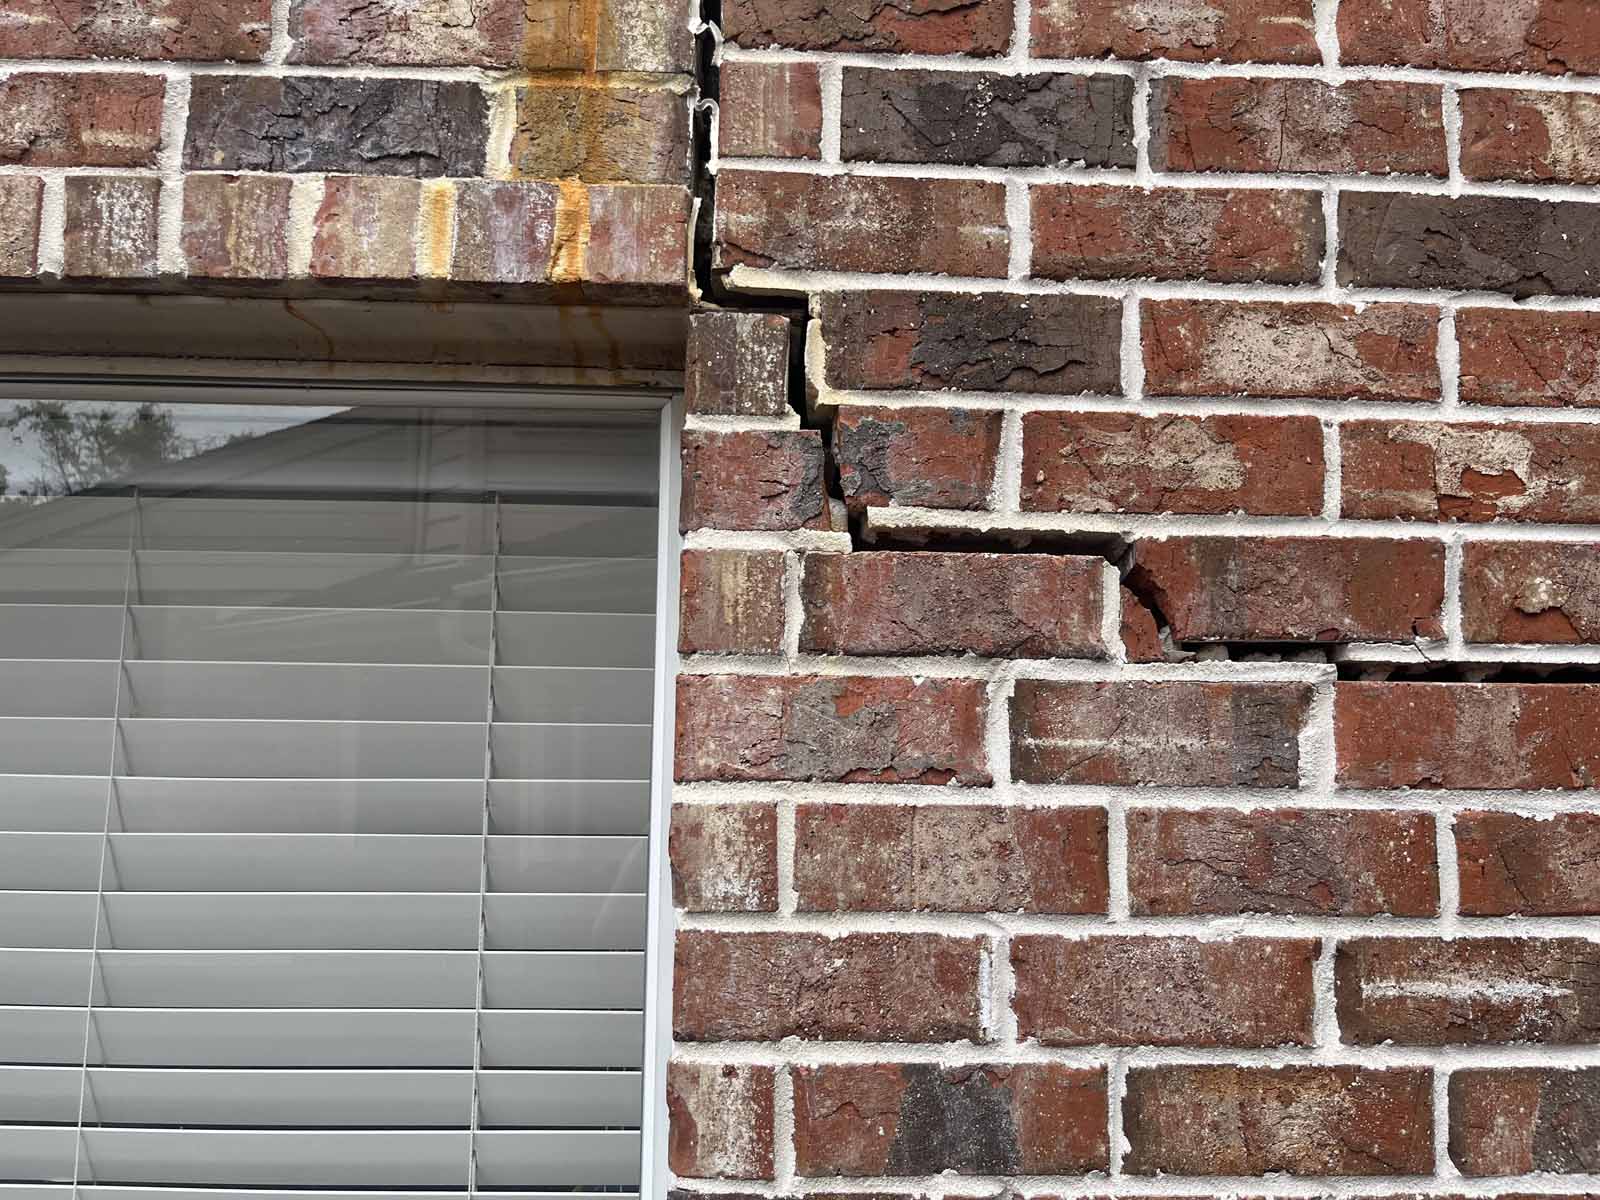 Soil movement moves and cracks slab foundations which in turn causes cracks in the exterior brick wall.